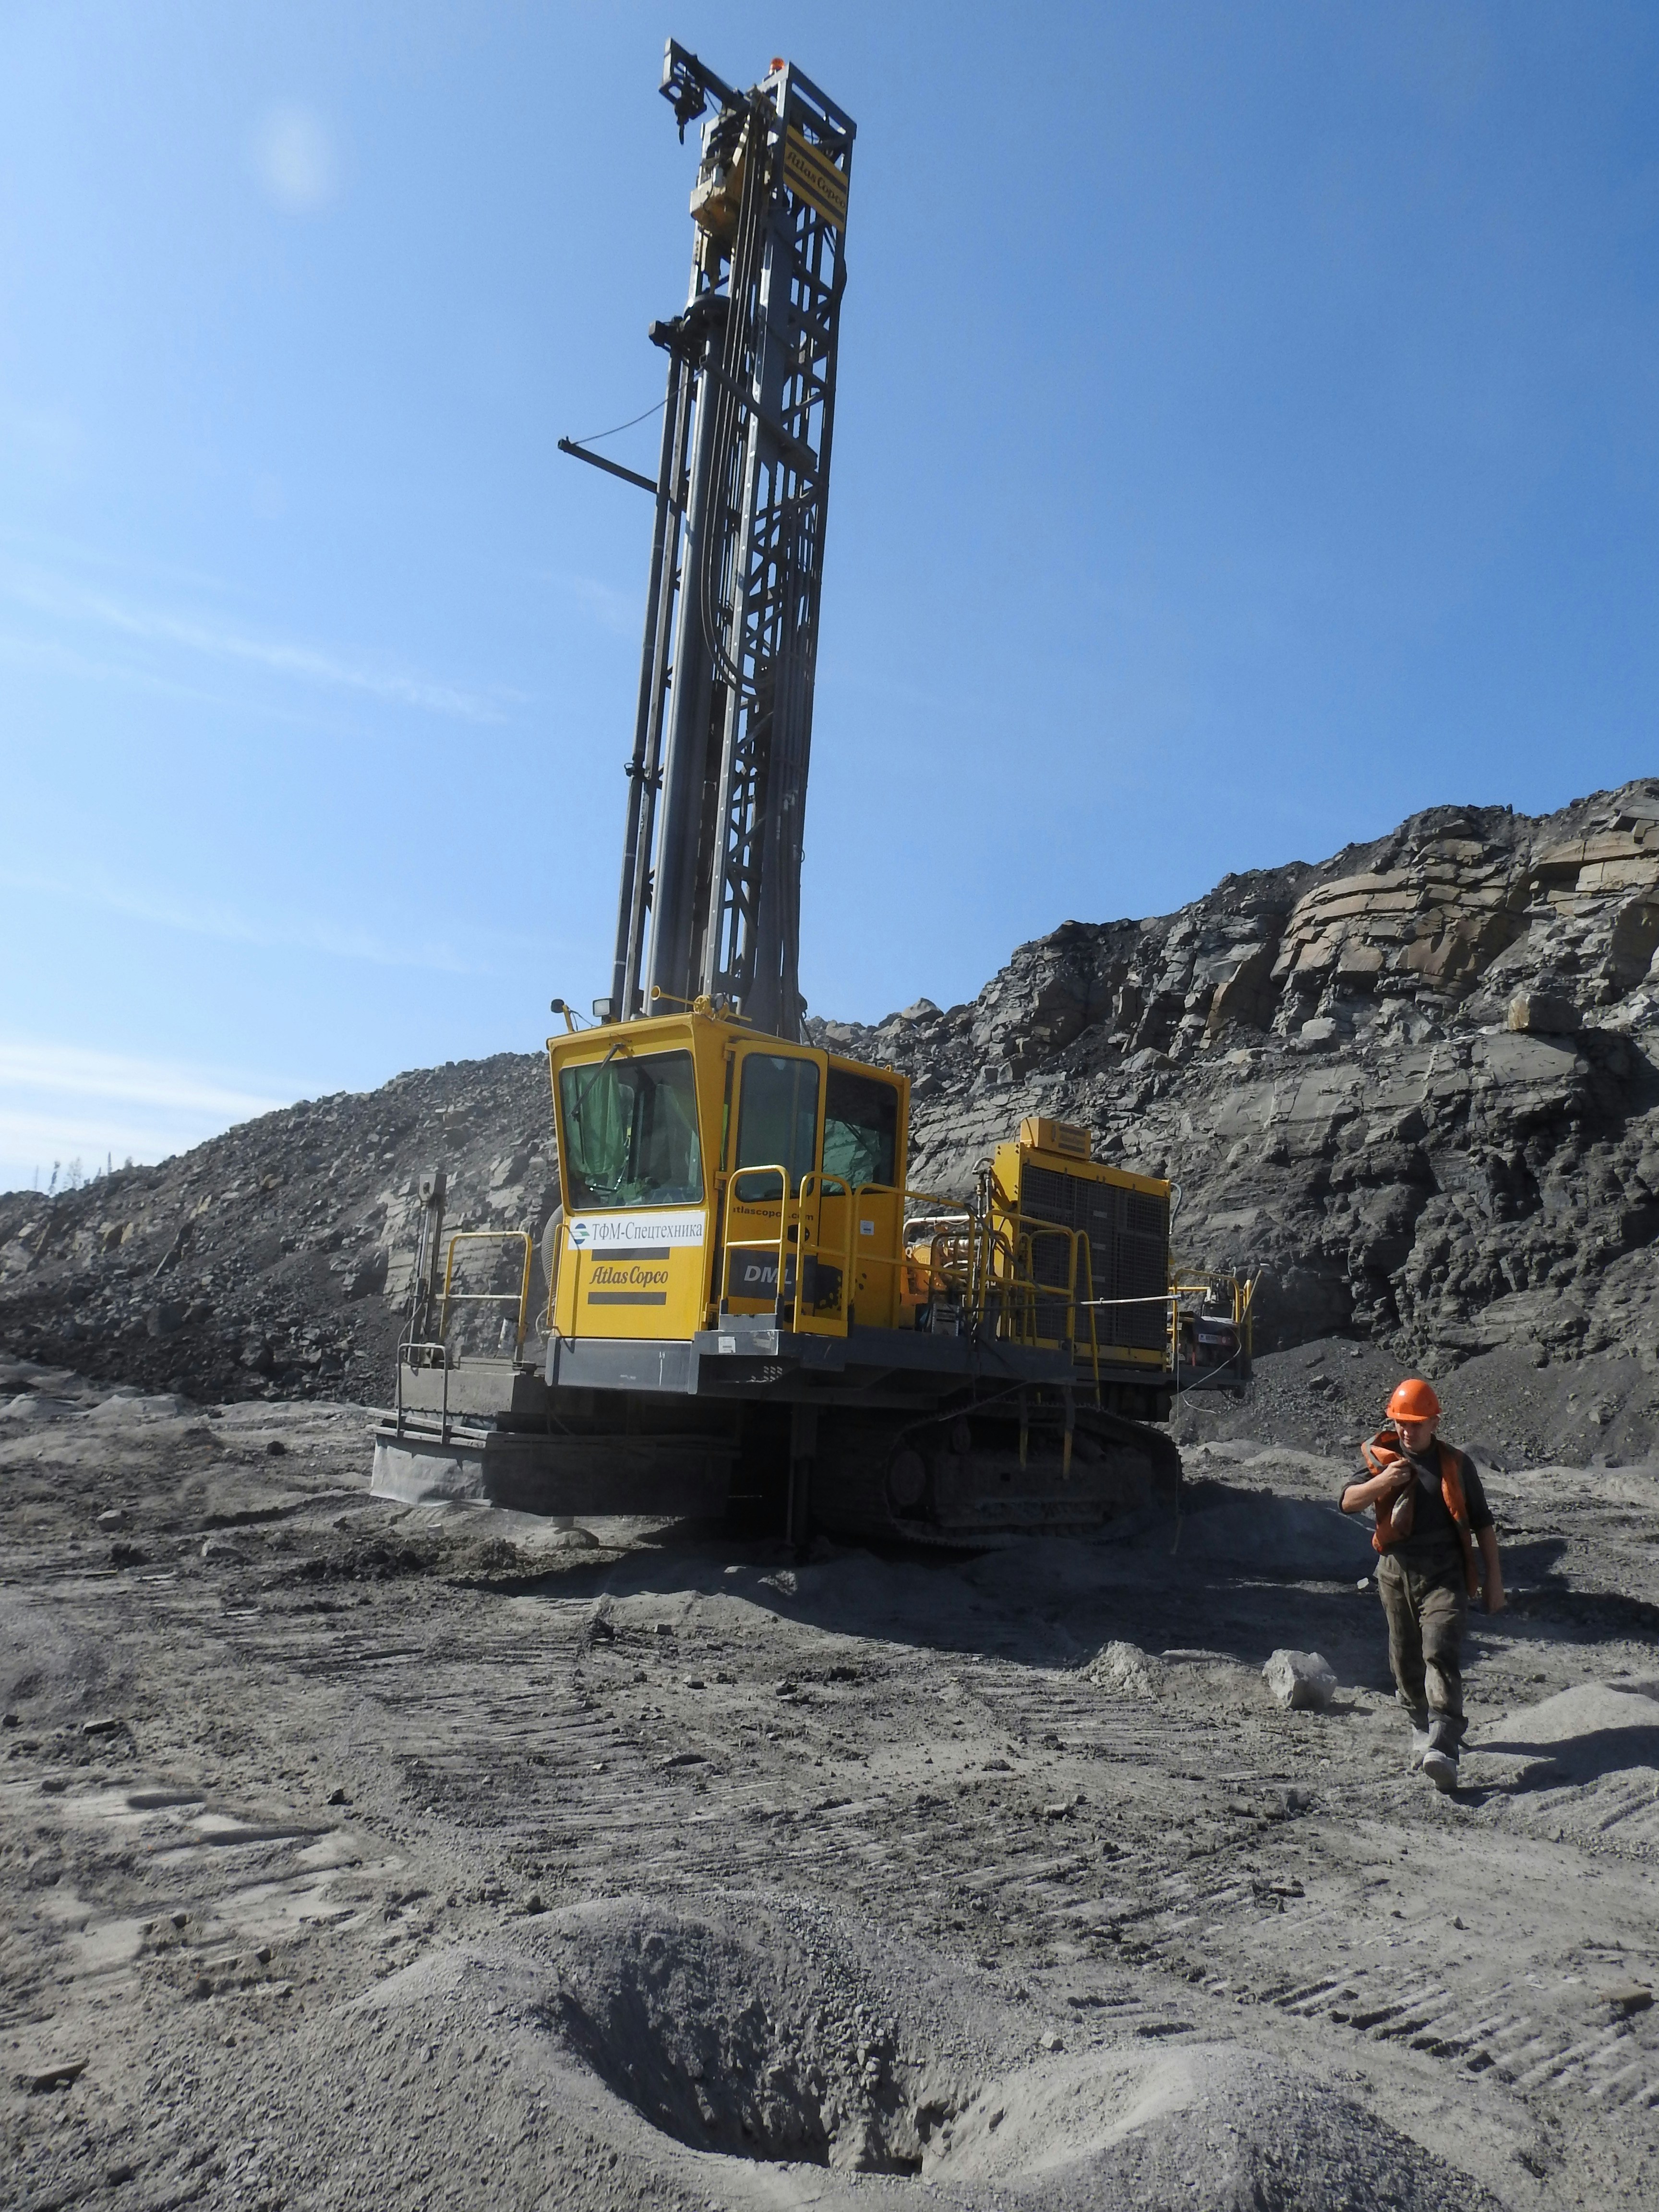 Powerful dth drilling tools in action on rocky terrain